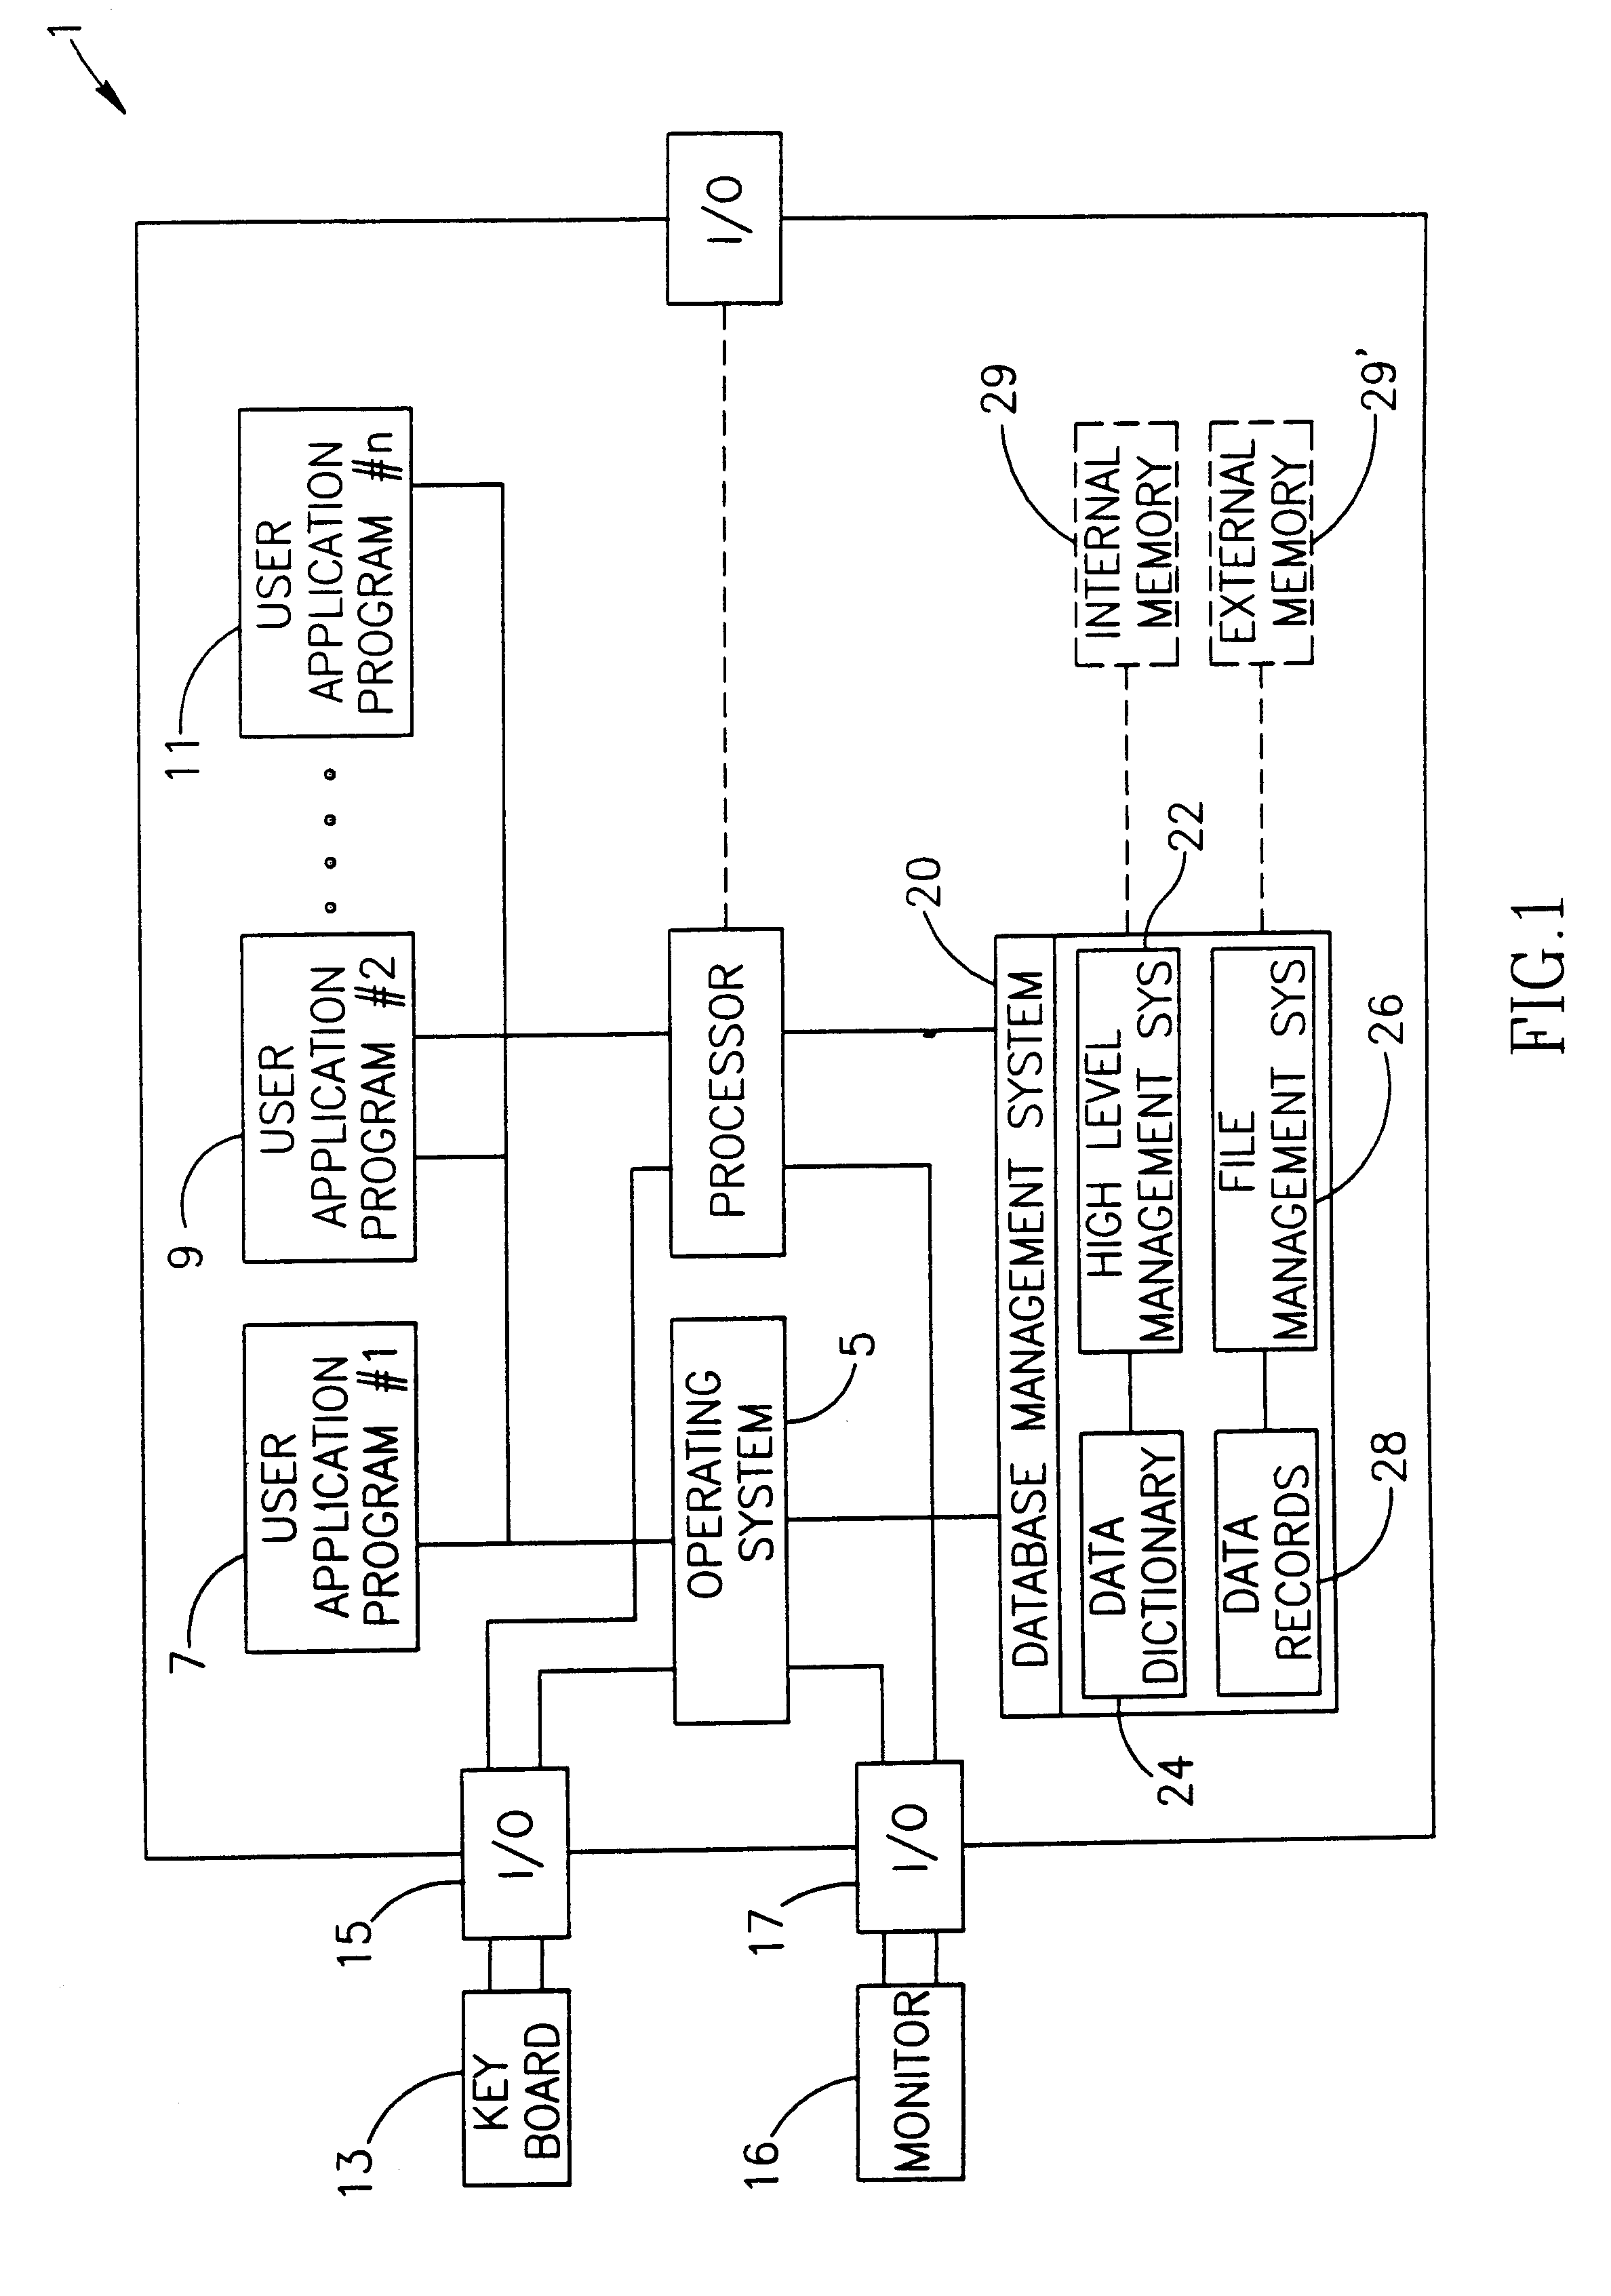 Layered index with a basic unbalanced partitioned index that allows a balanced structure of blocks